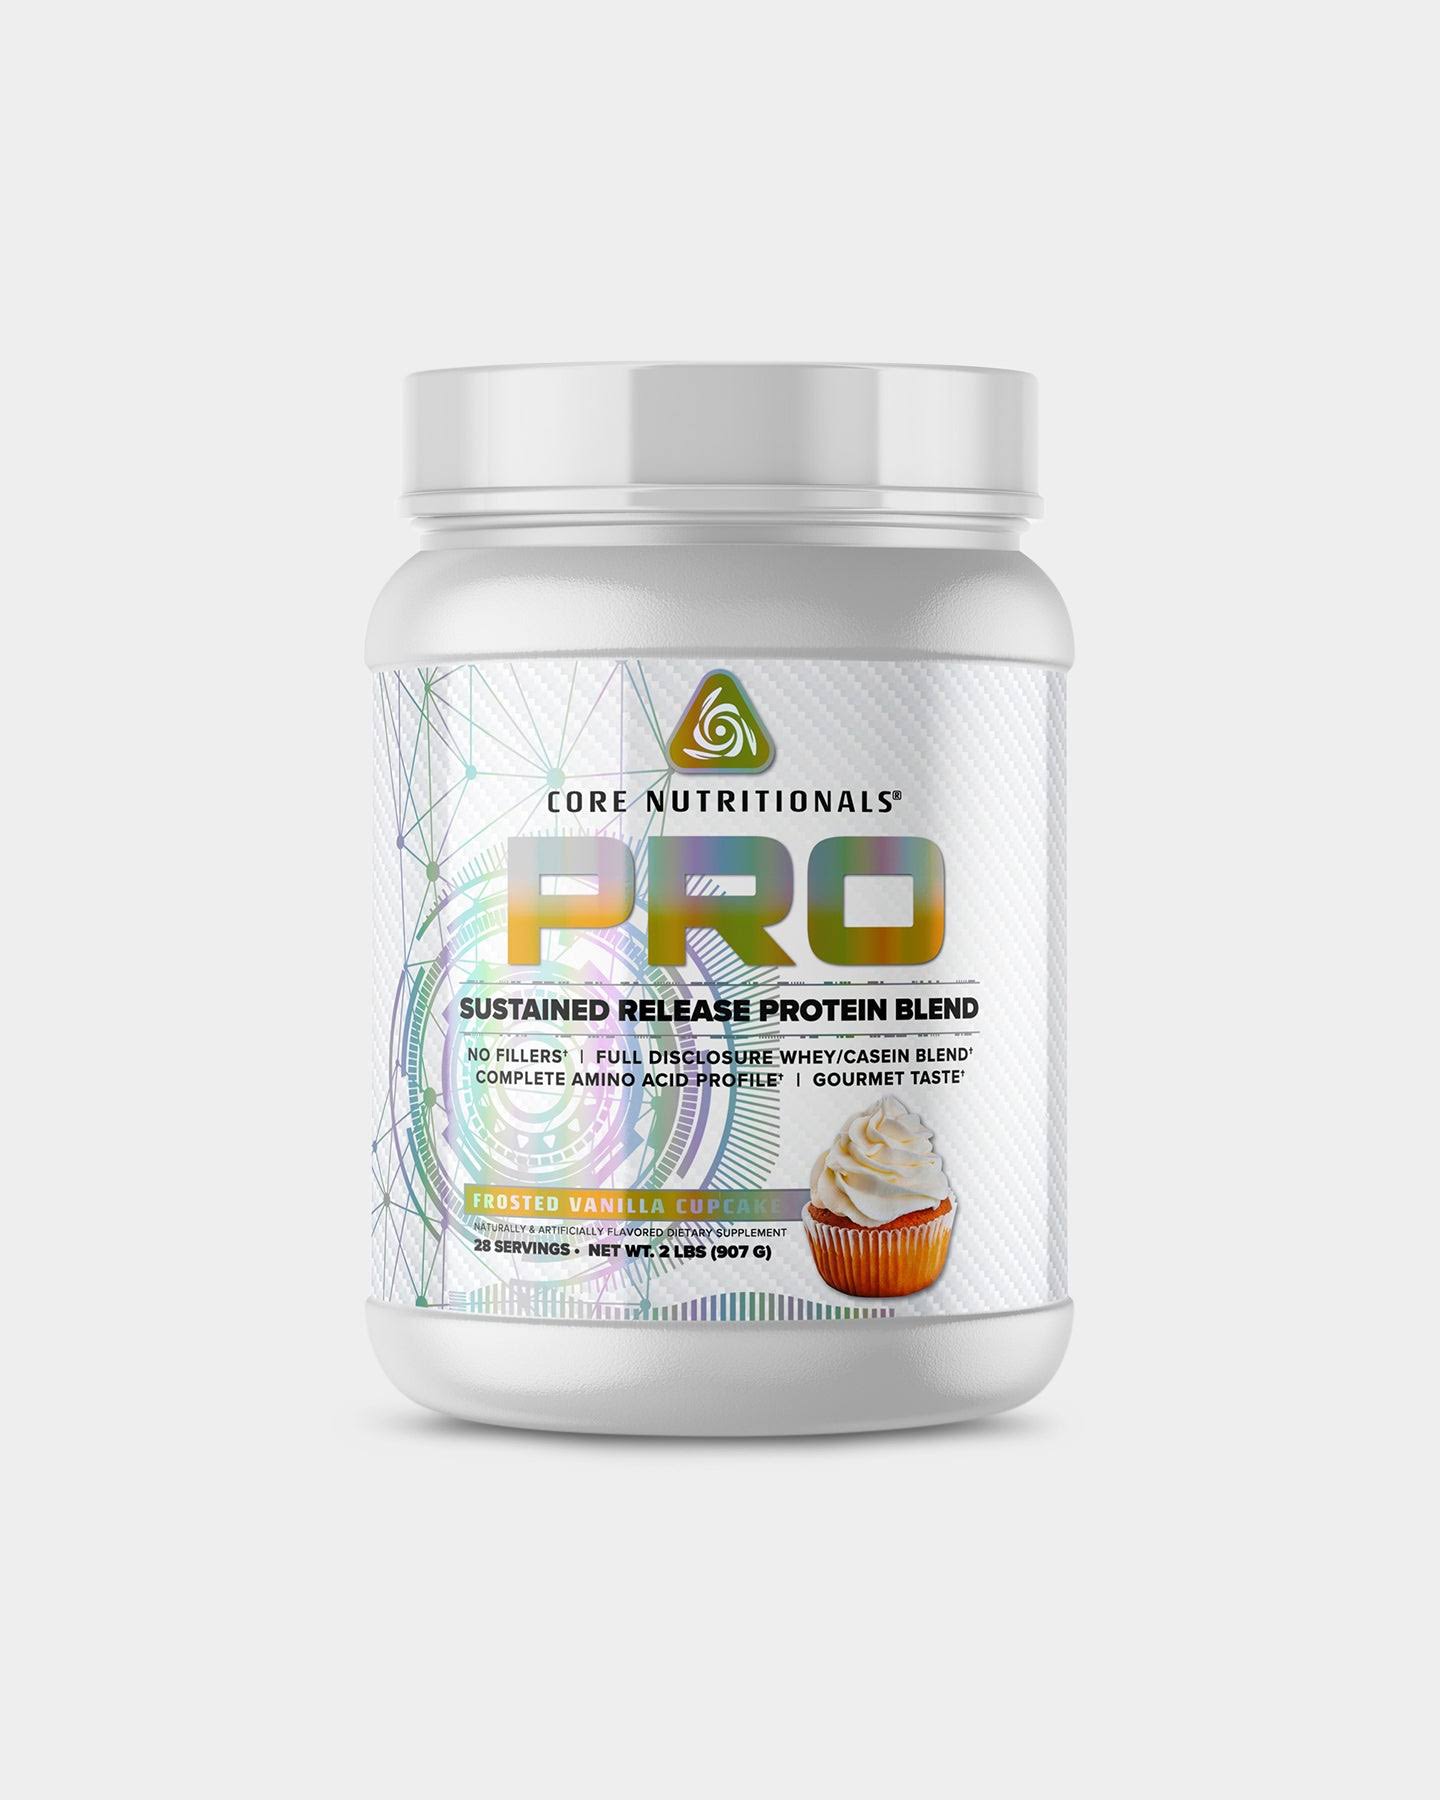 Core Nutritionals Core Pro 25 - 907 G - Frosted Vanilla Cupcake